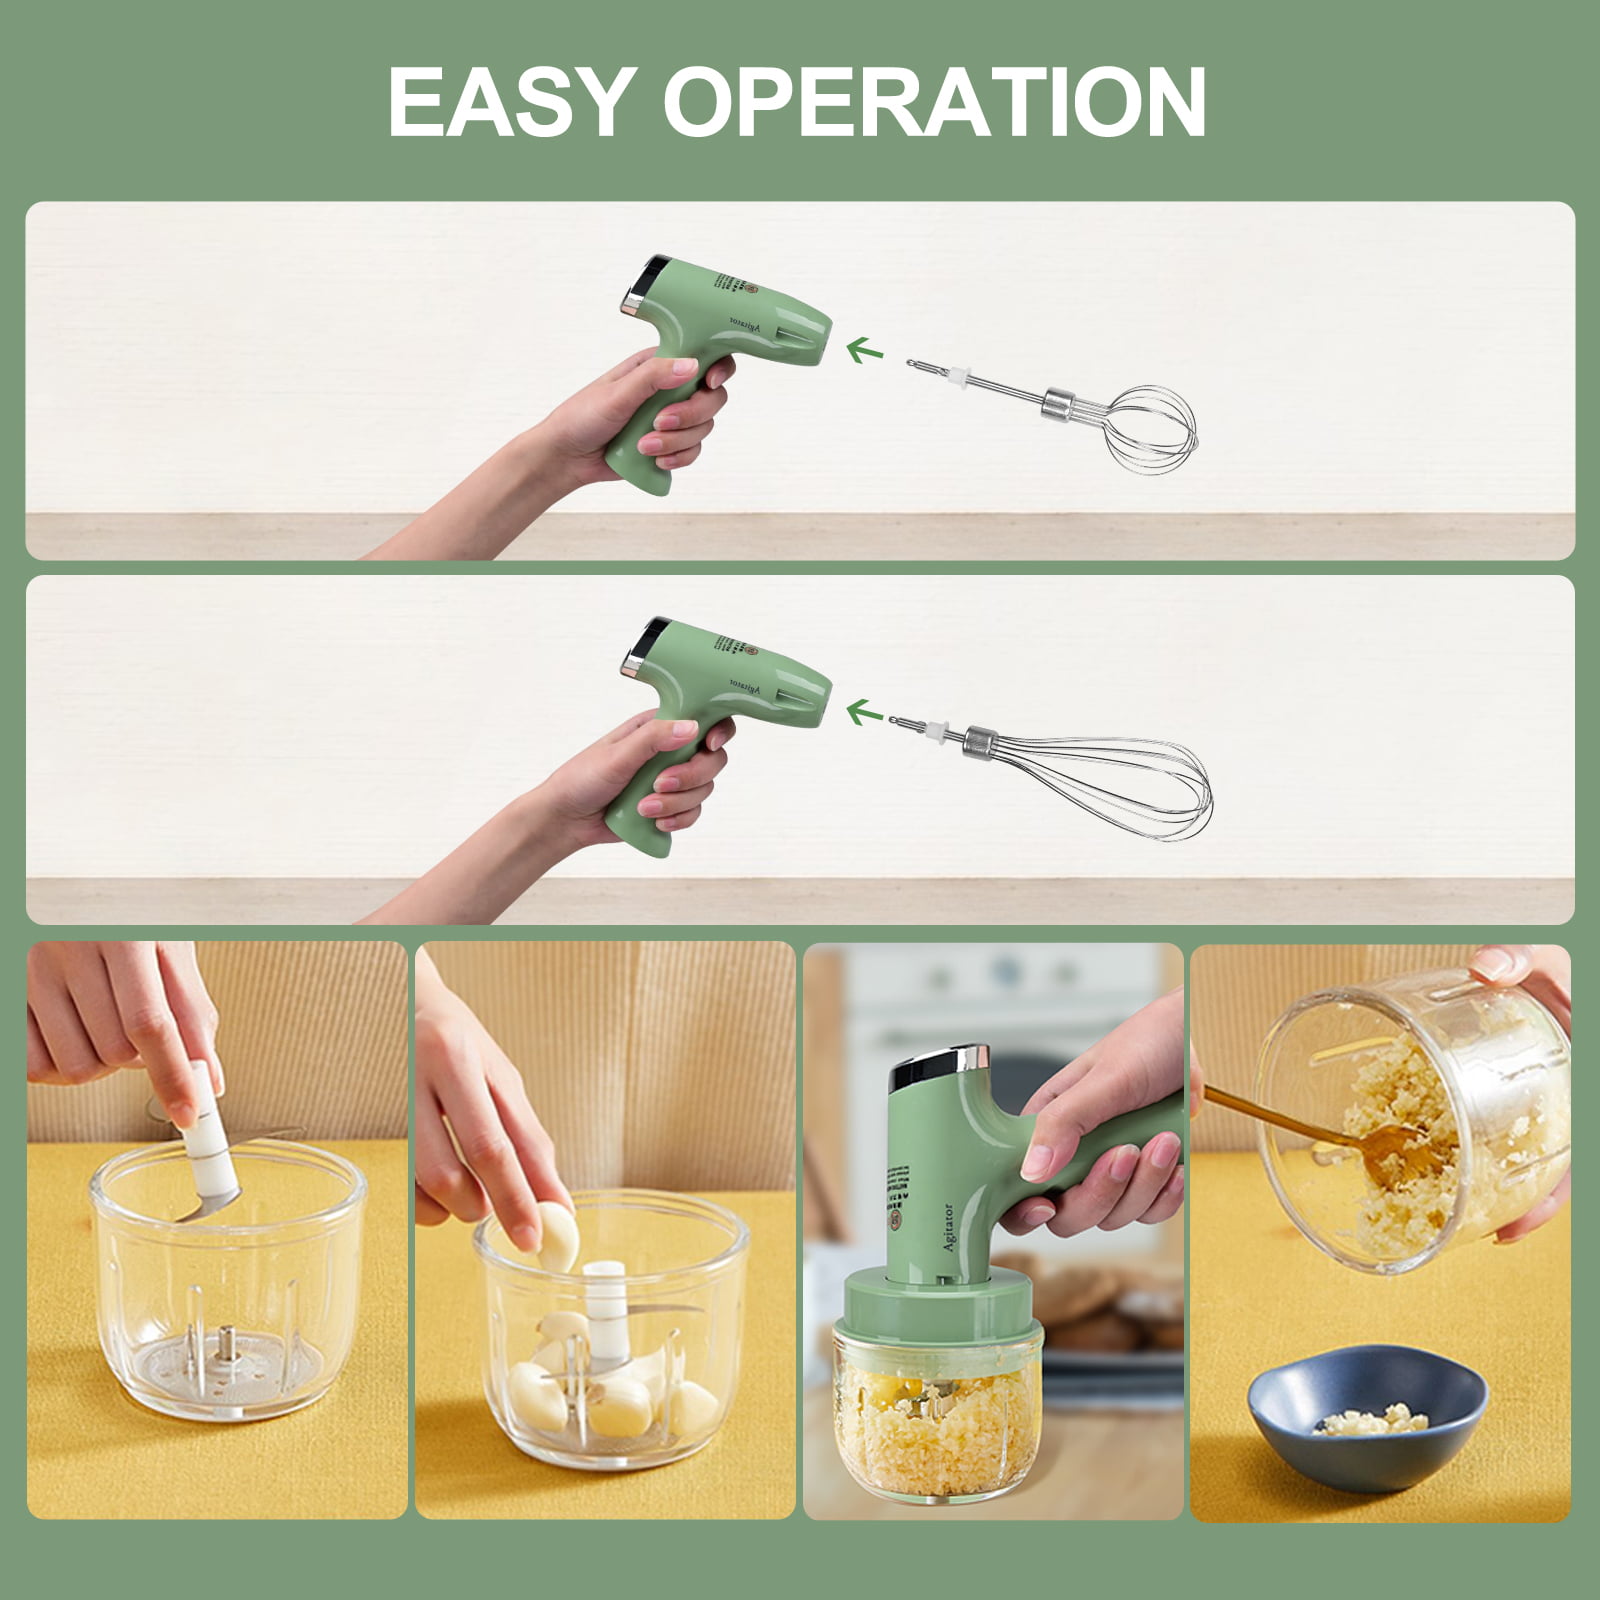 4 In 1 Electric Chopper Vegetable Cutter Set, Lychee Handheld